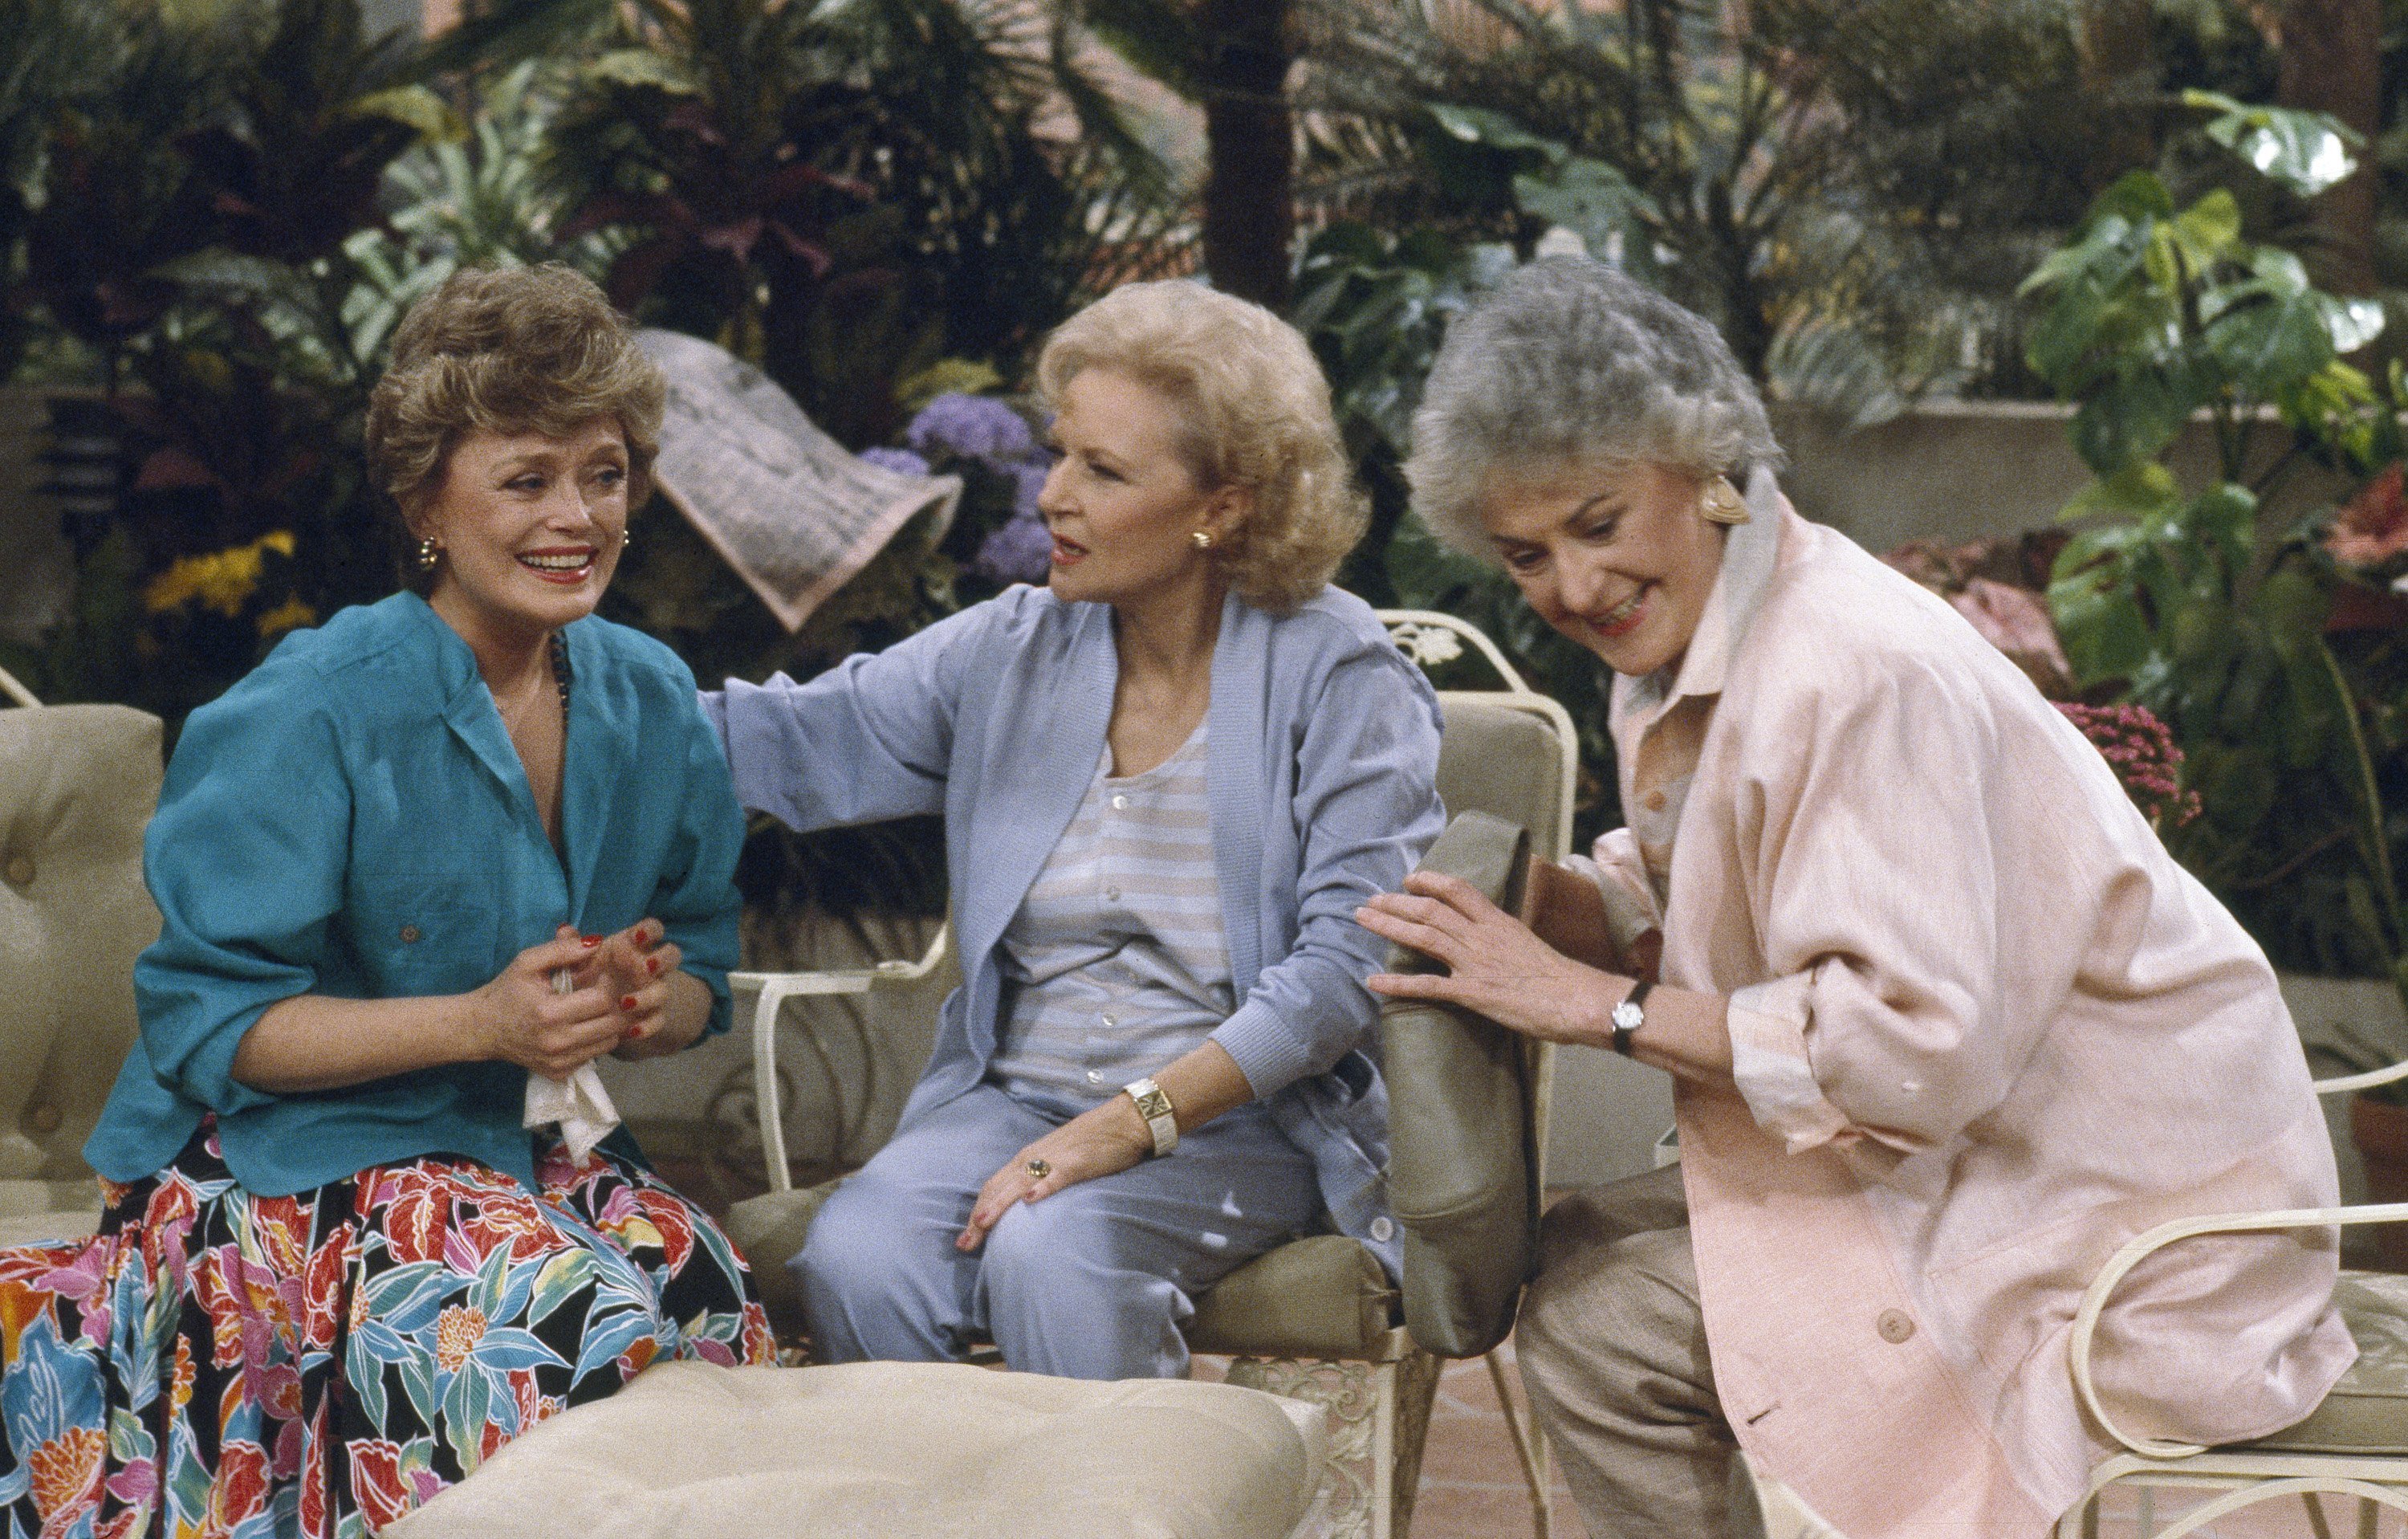 Rue McClanahan, Betty White, and Bea Arthur of 'The Golden Girls'